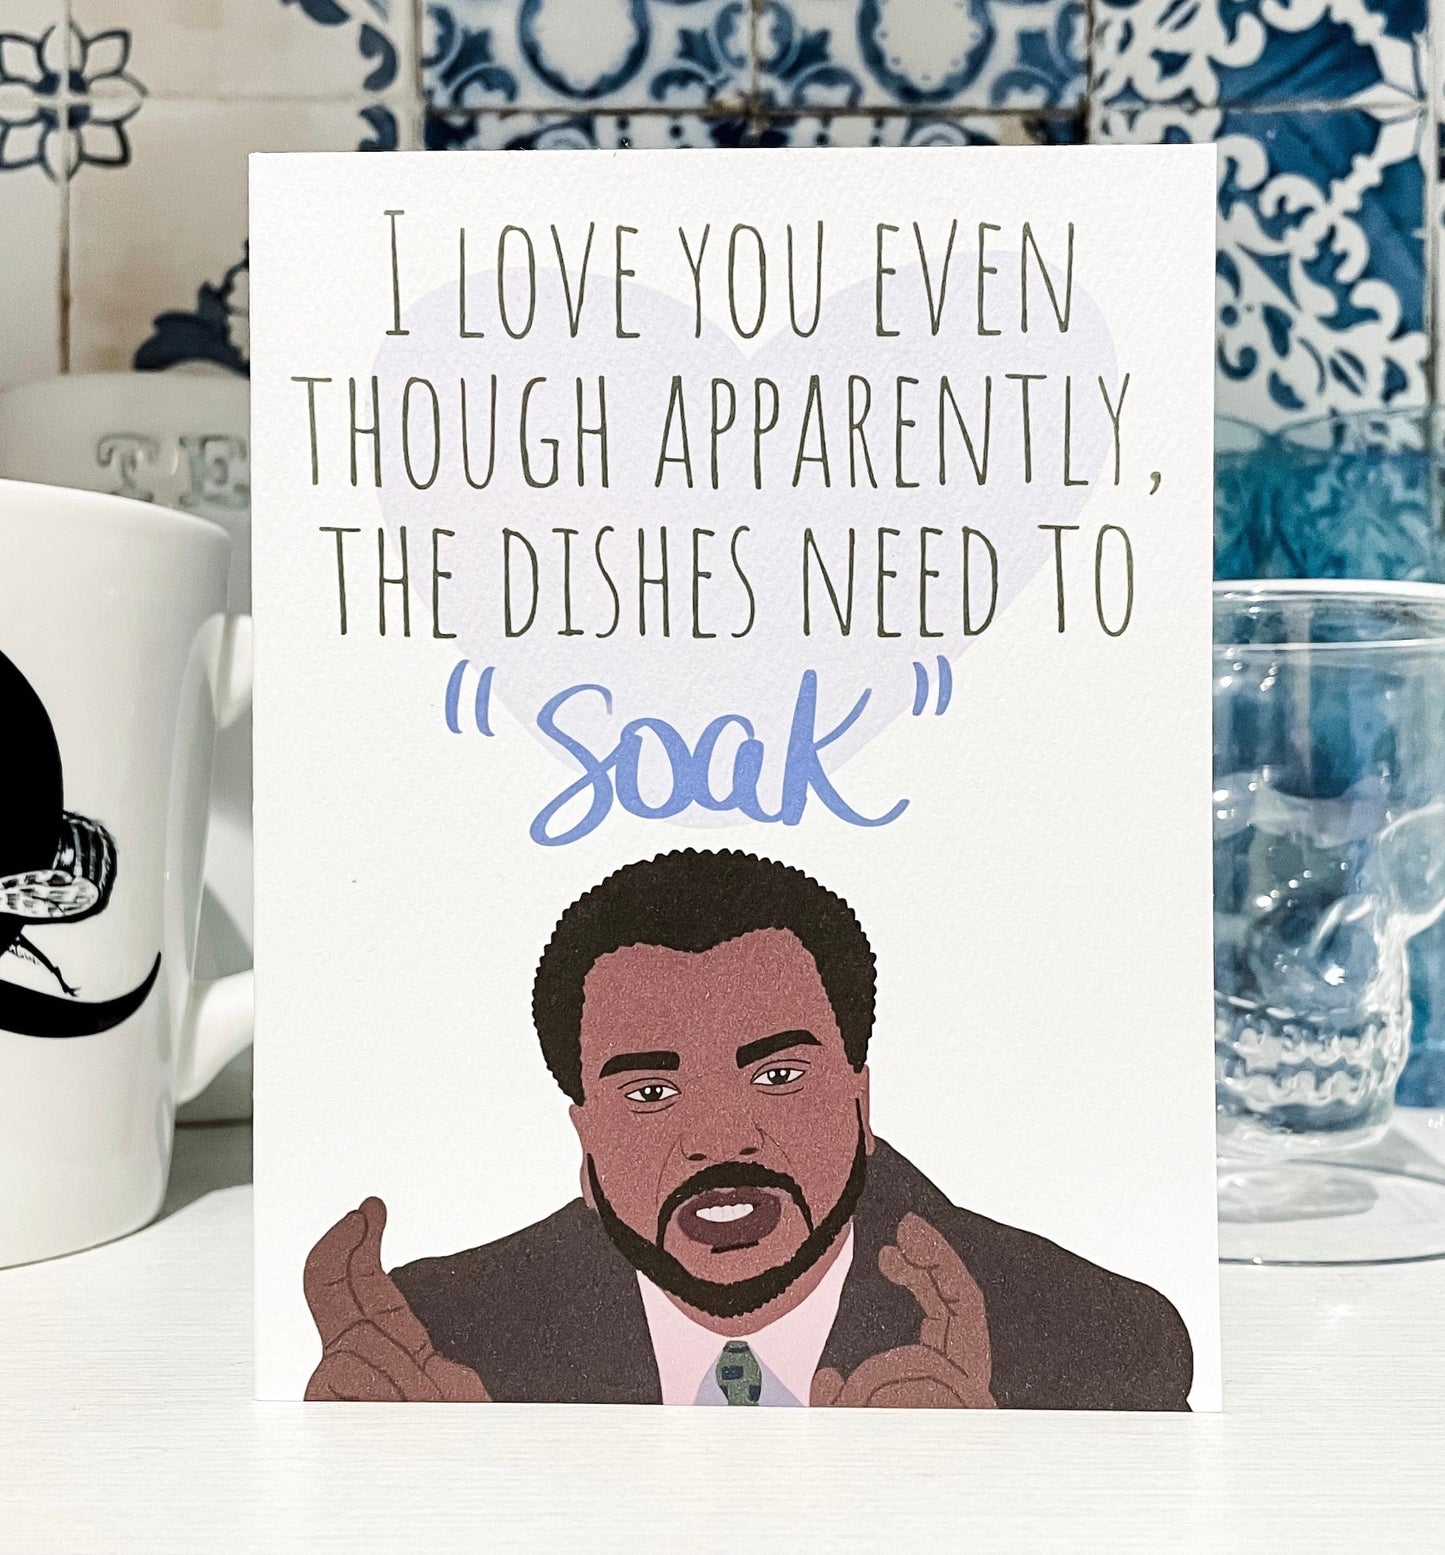 The Darryl Soak Card. The Office Greeting Card. Office Inspired Funny Card.